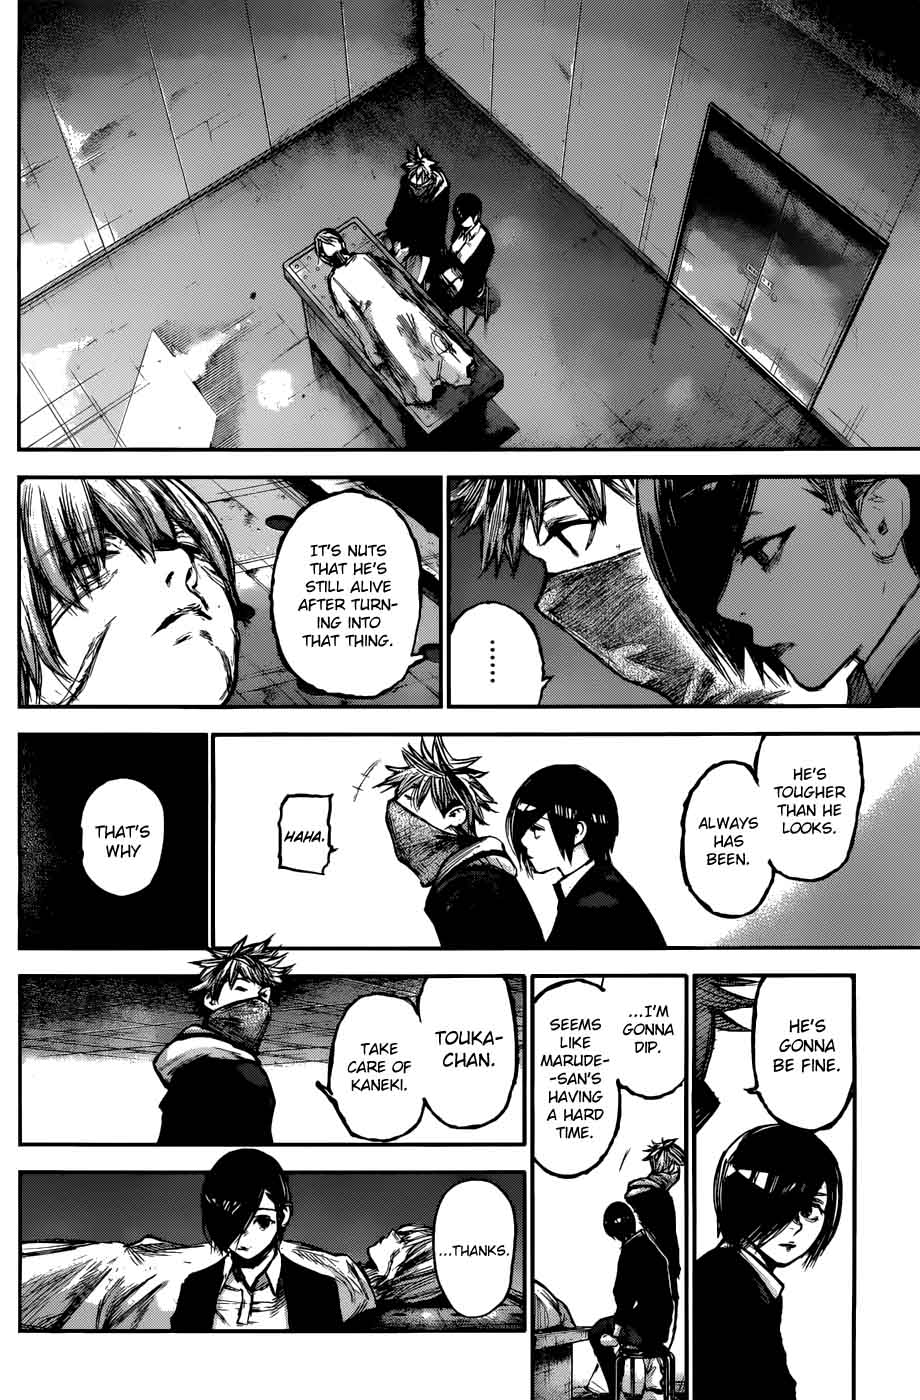 Tokyo Ghoul Re Chapter 162 Holding A Pomegranate Tokyo Ghoul Manga Online